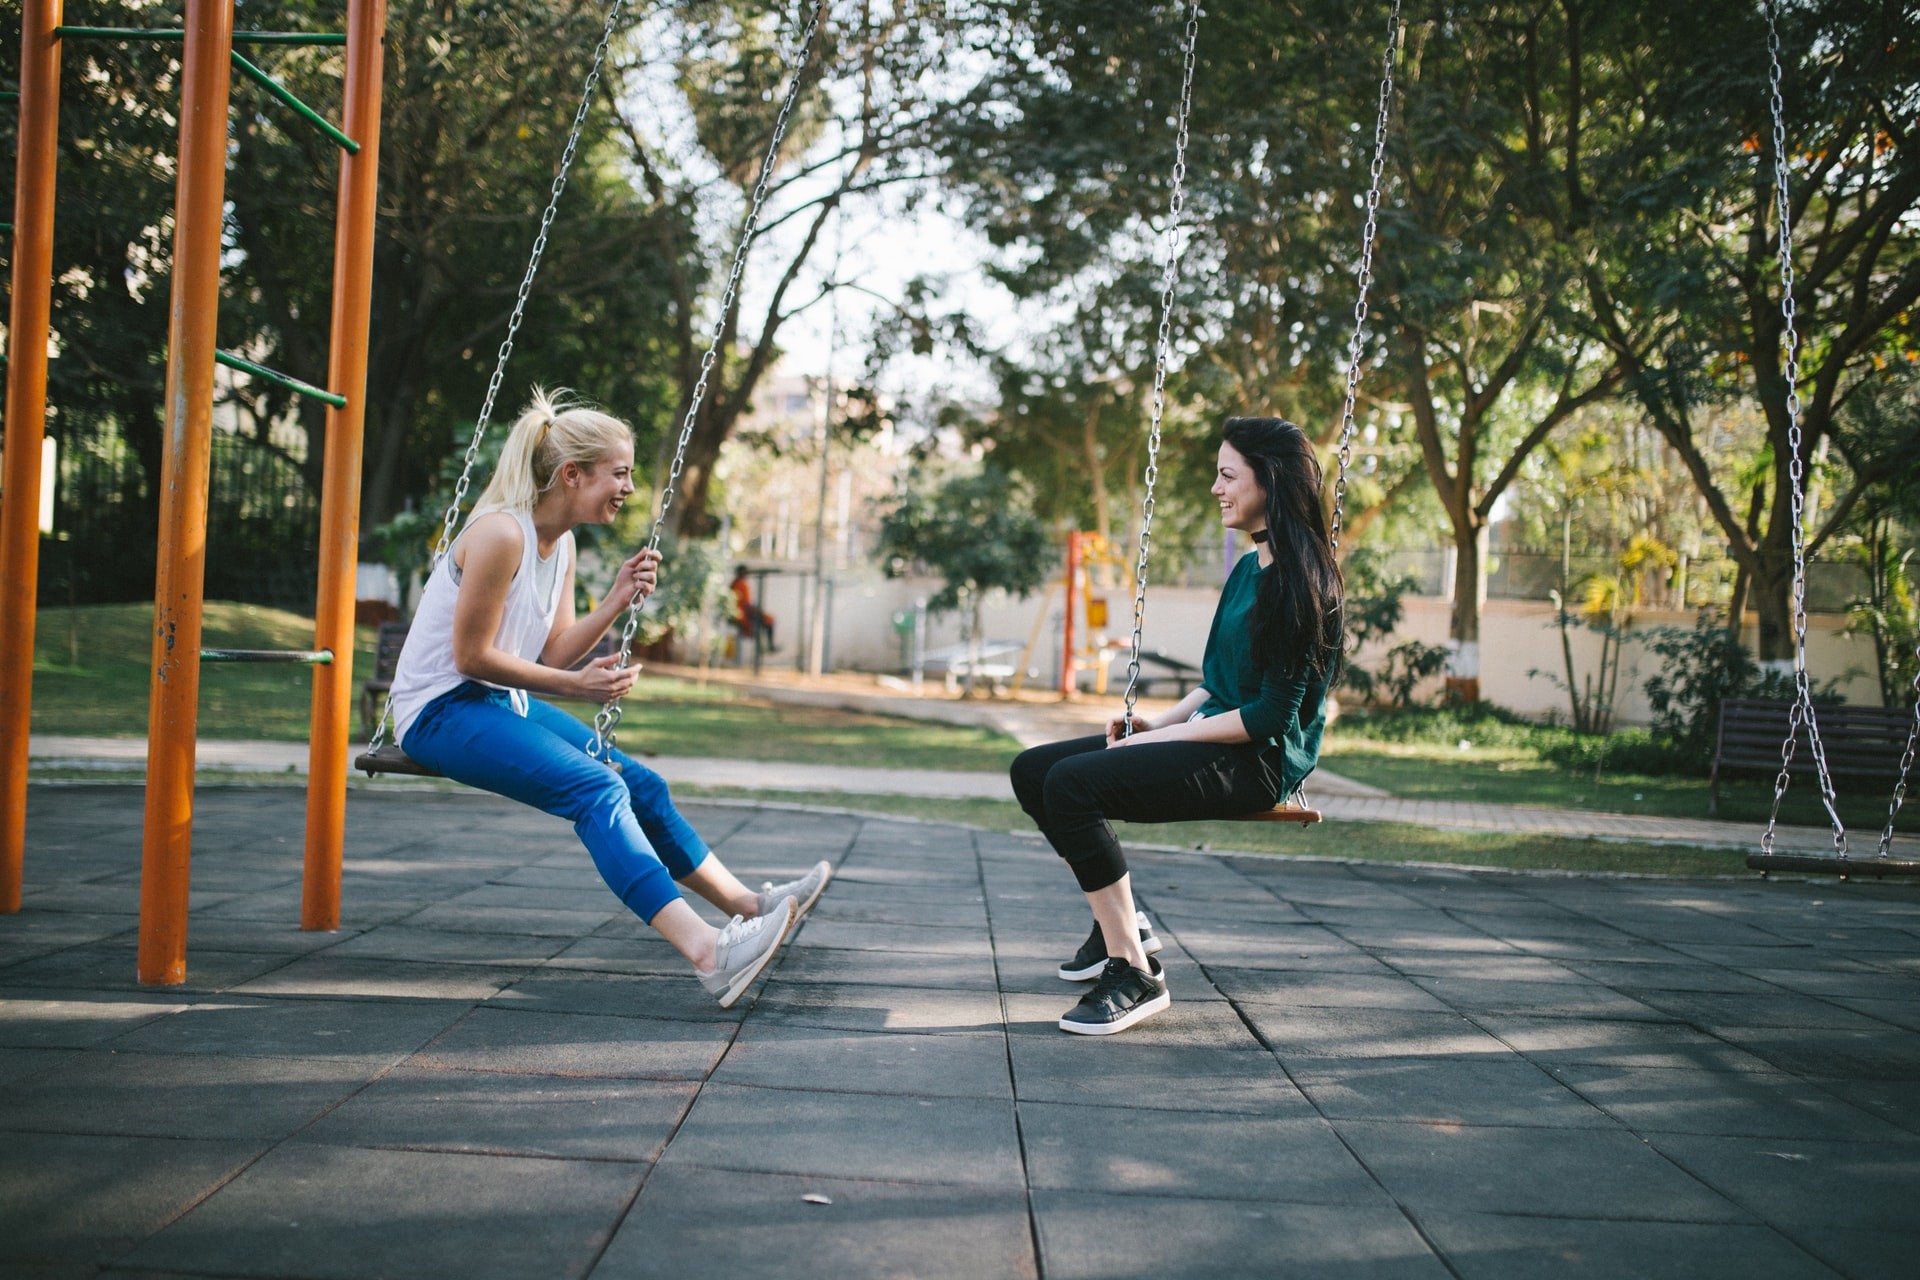 Two young women sit on swings in a playground, facing each other and smiling.